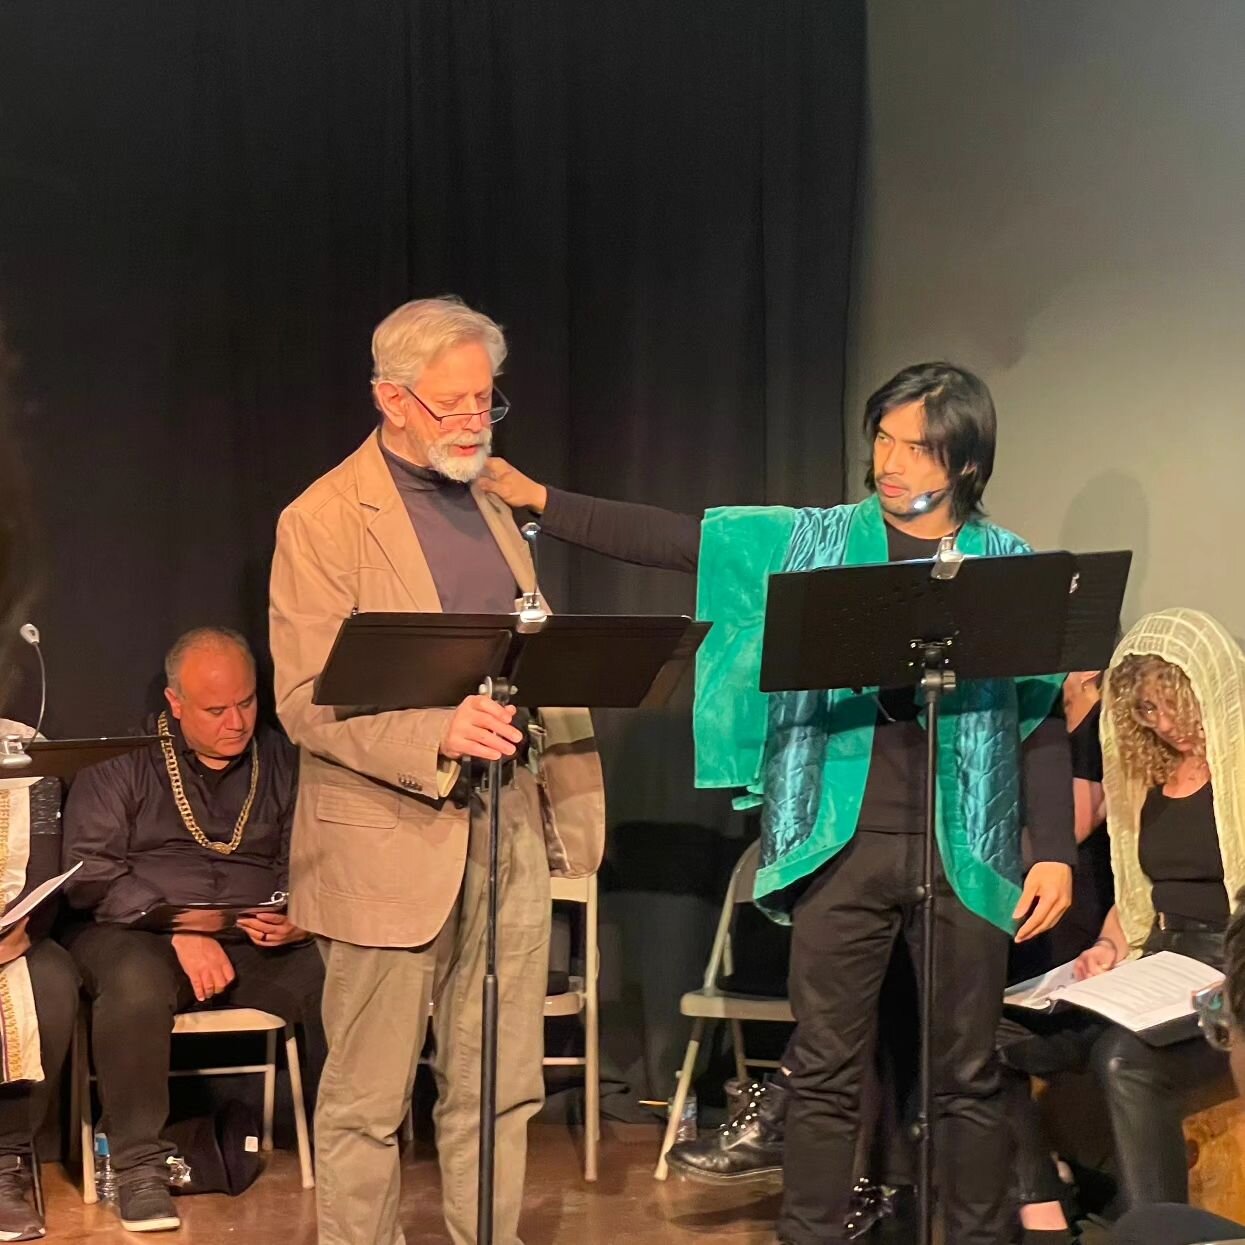 On Her Shoulders is back and in-person! We have so much love and appreciation for everyone involved with making this reading of DIDO happen, as well as those who came. More On Her Shoulders readings are slated for the upcoming months--keep an eye out